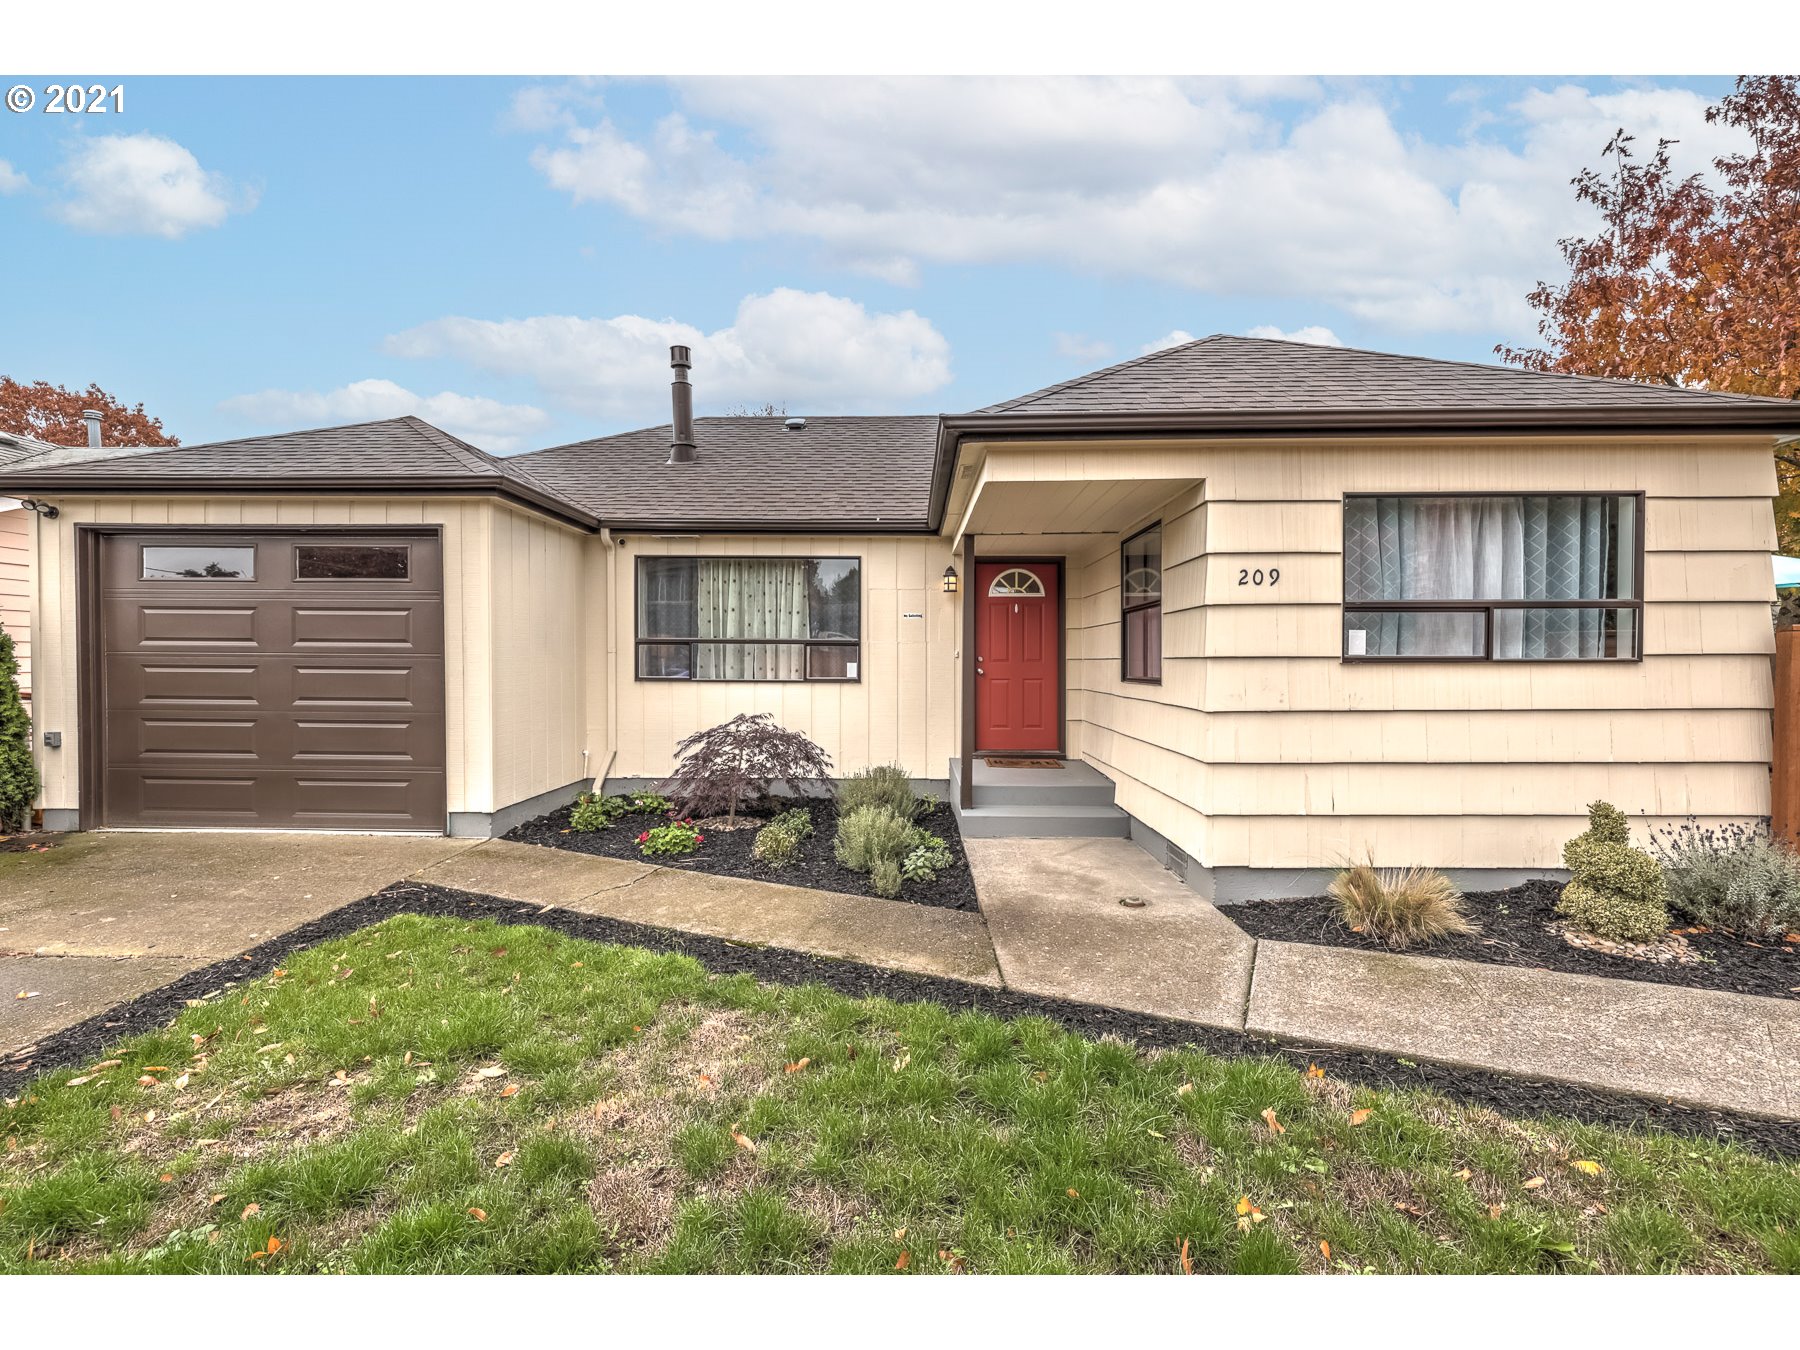 209 SE 90TH AVE (1 of 28)